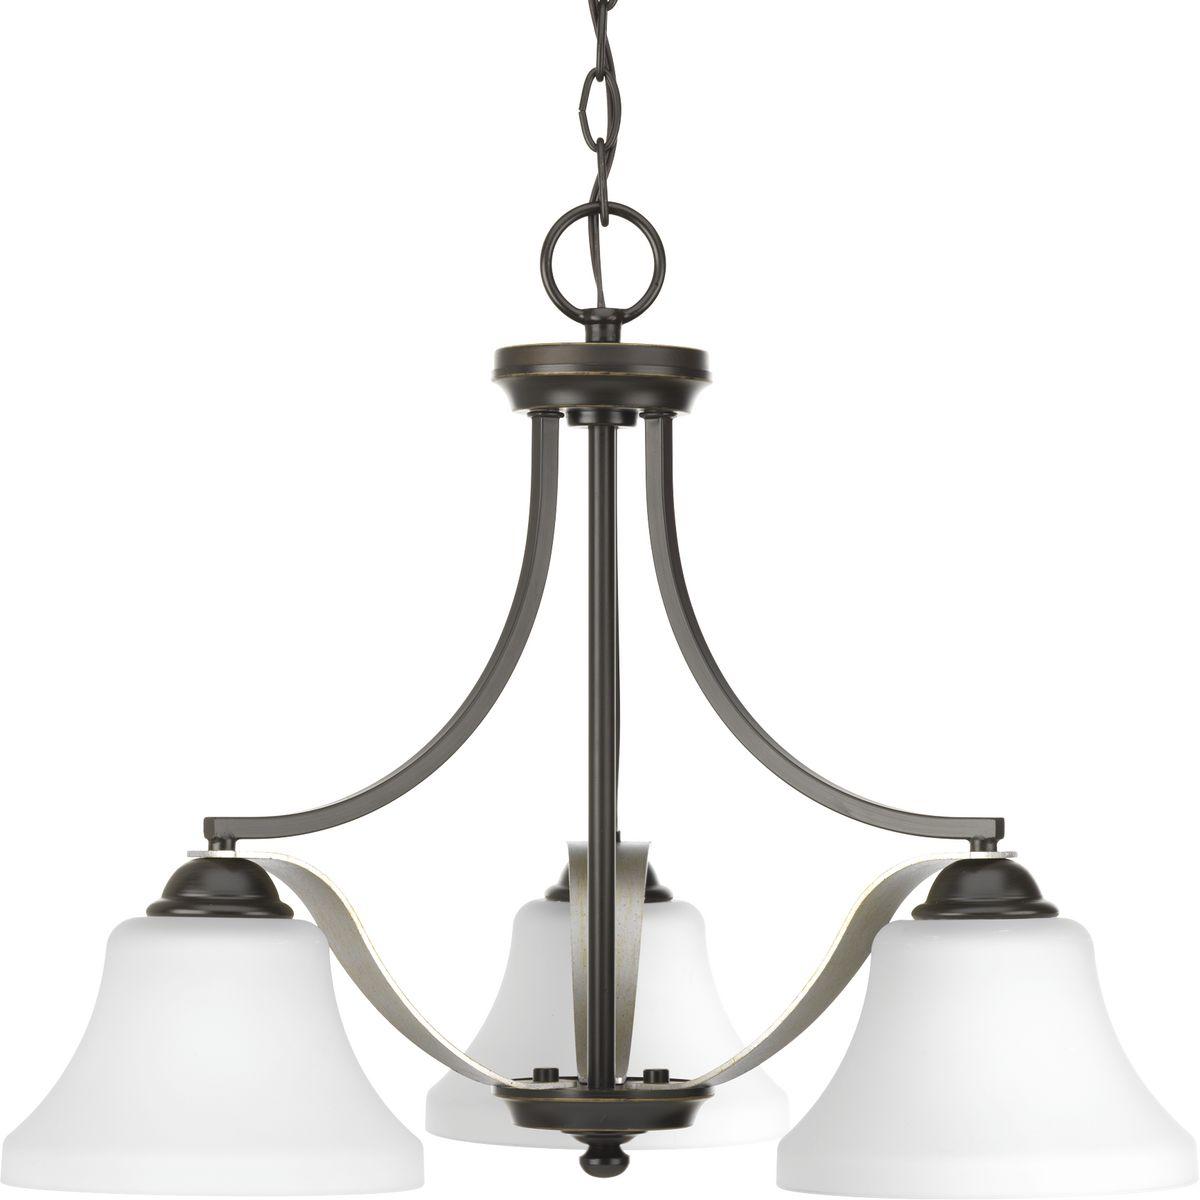 Hubbell P400011-020 Mixed finishes of Antique Bronze with Champagne accents are highlighted in Noma. Soft angles and curving lines created from flat metal straps elegantly frame etched white glass shades. The three-light chandelier is part of our Design Series collections.  